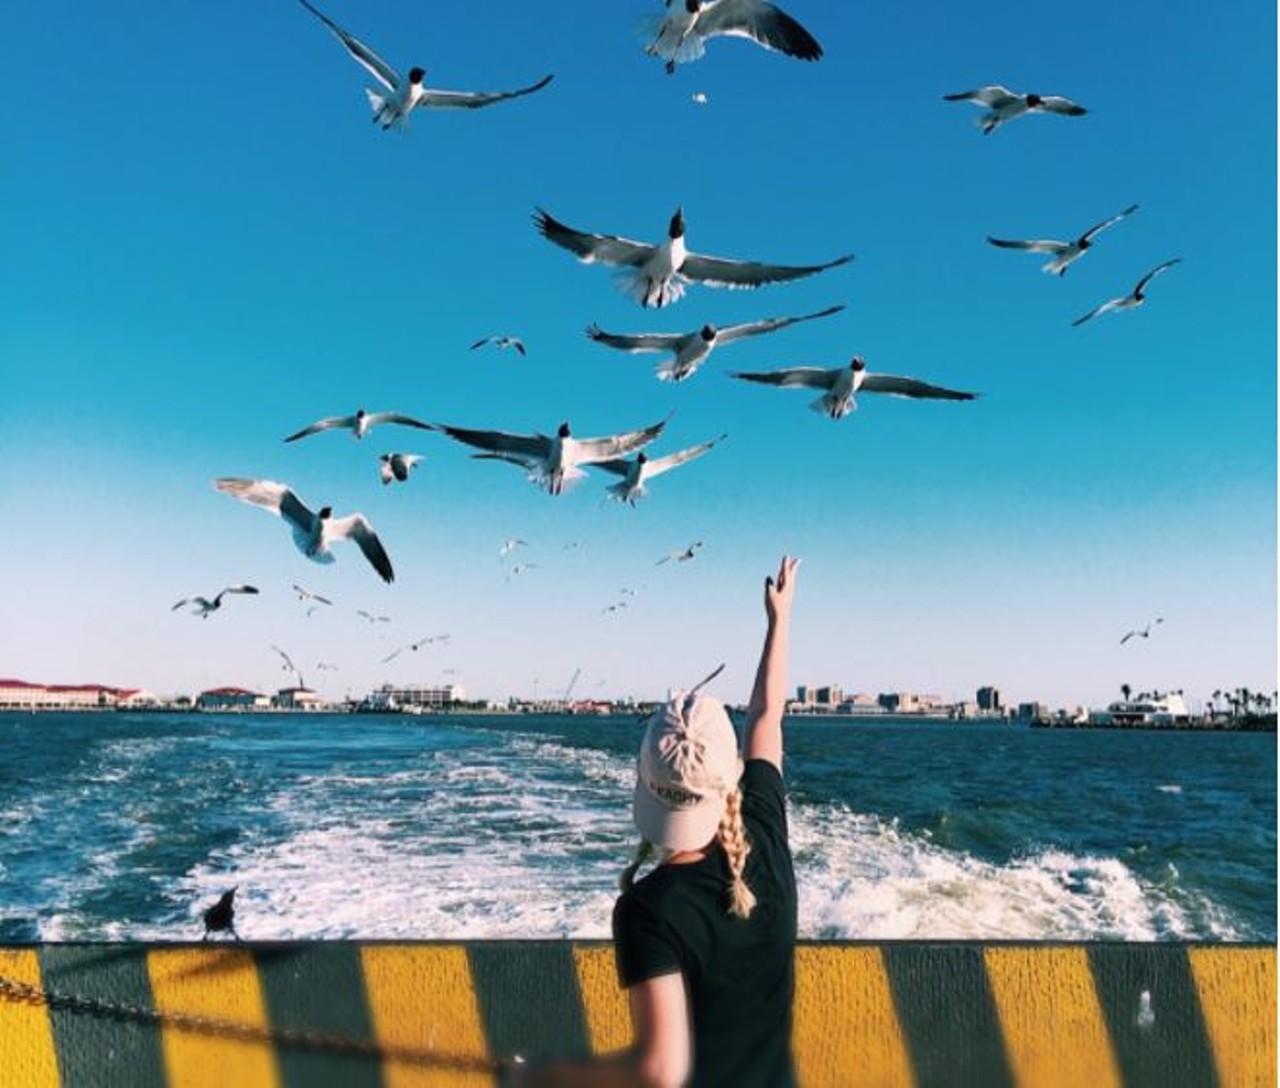 Crystal Beach
Travel time: 4 hours, 30 minutes
Have fun and feed some seagulls at during these hot summer months at Crystal Beach. 
Photo via Instagram,  leahbrene